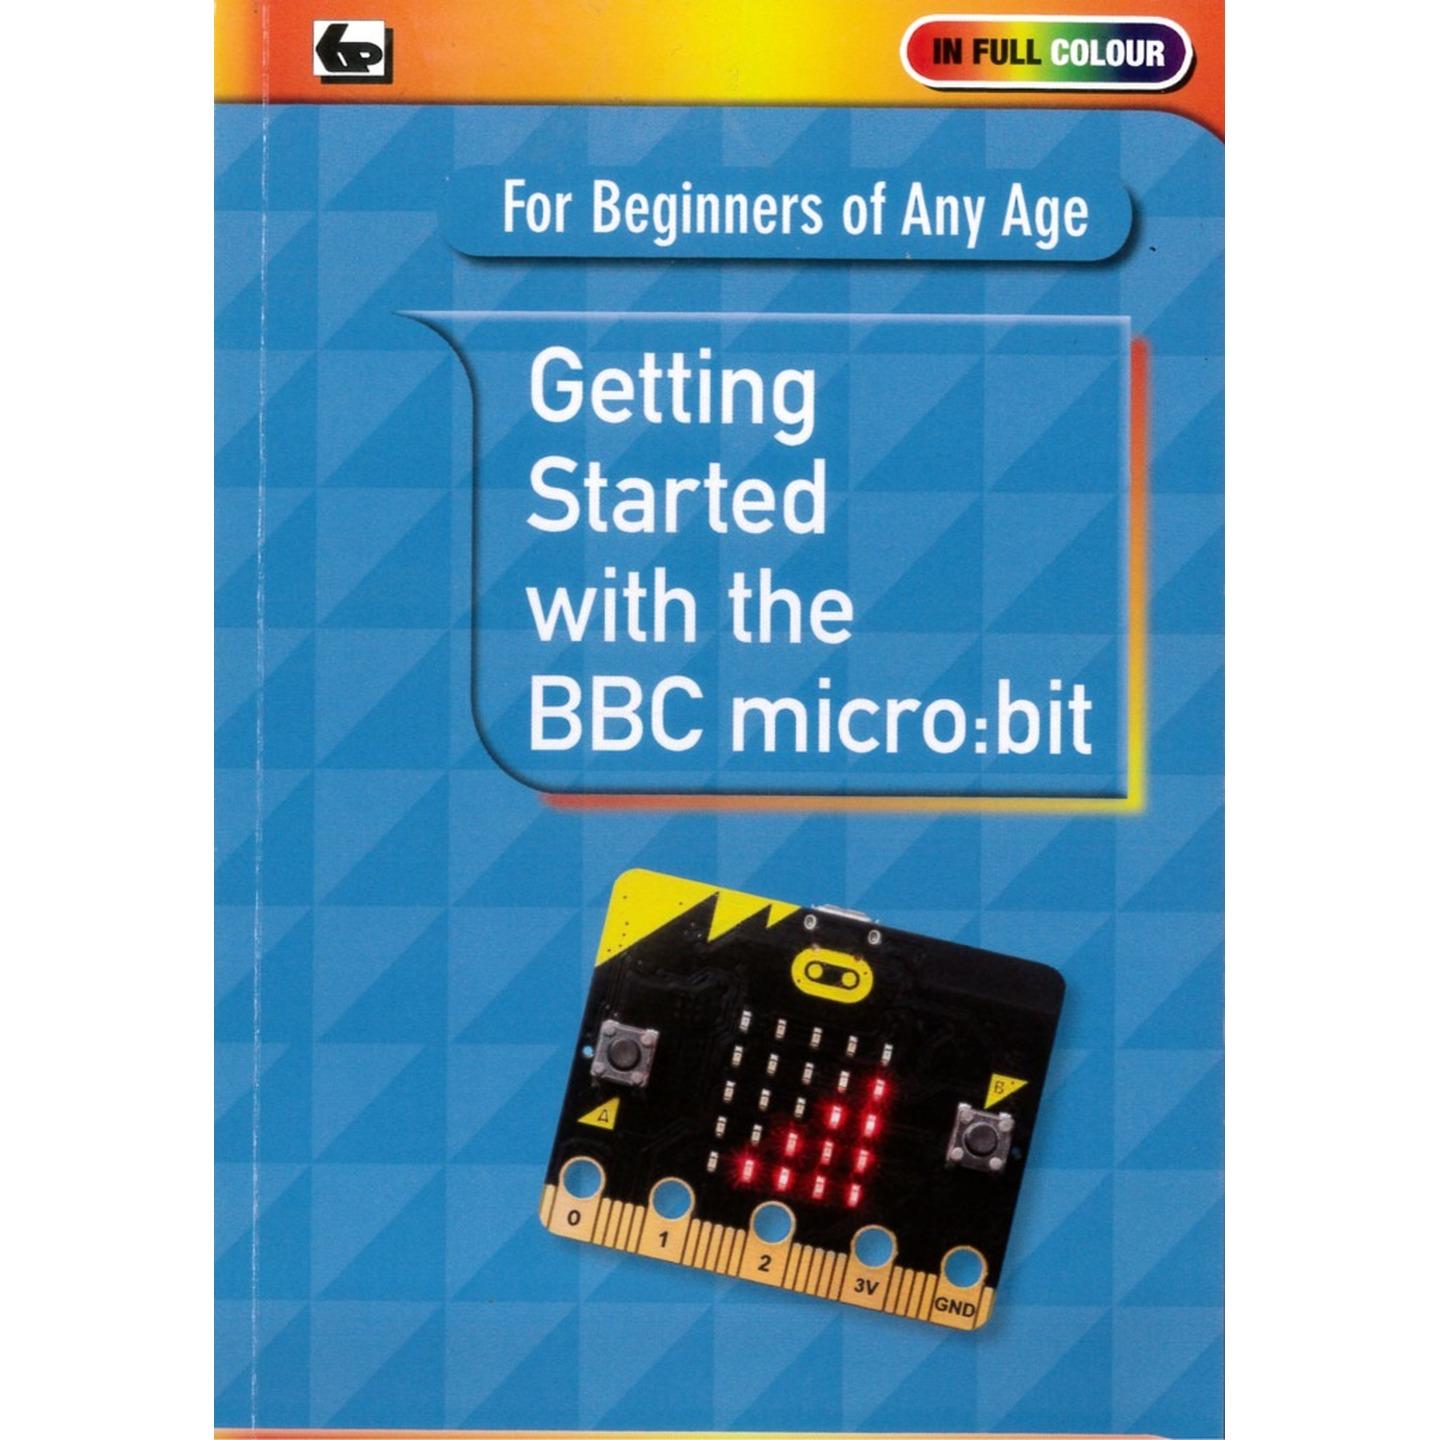 Getting Started with BBC micro:bit